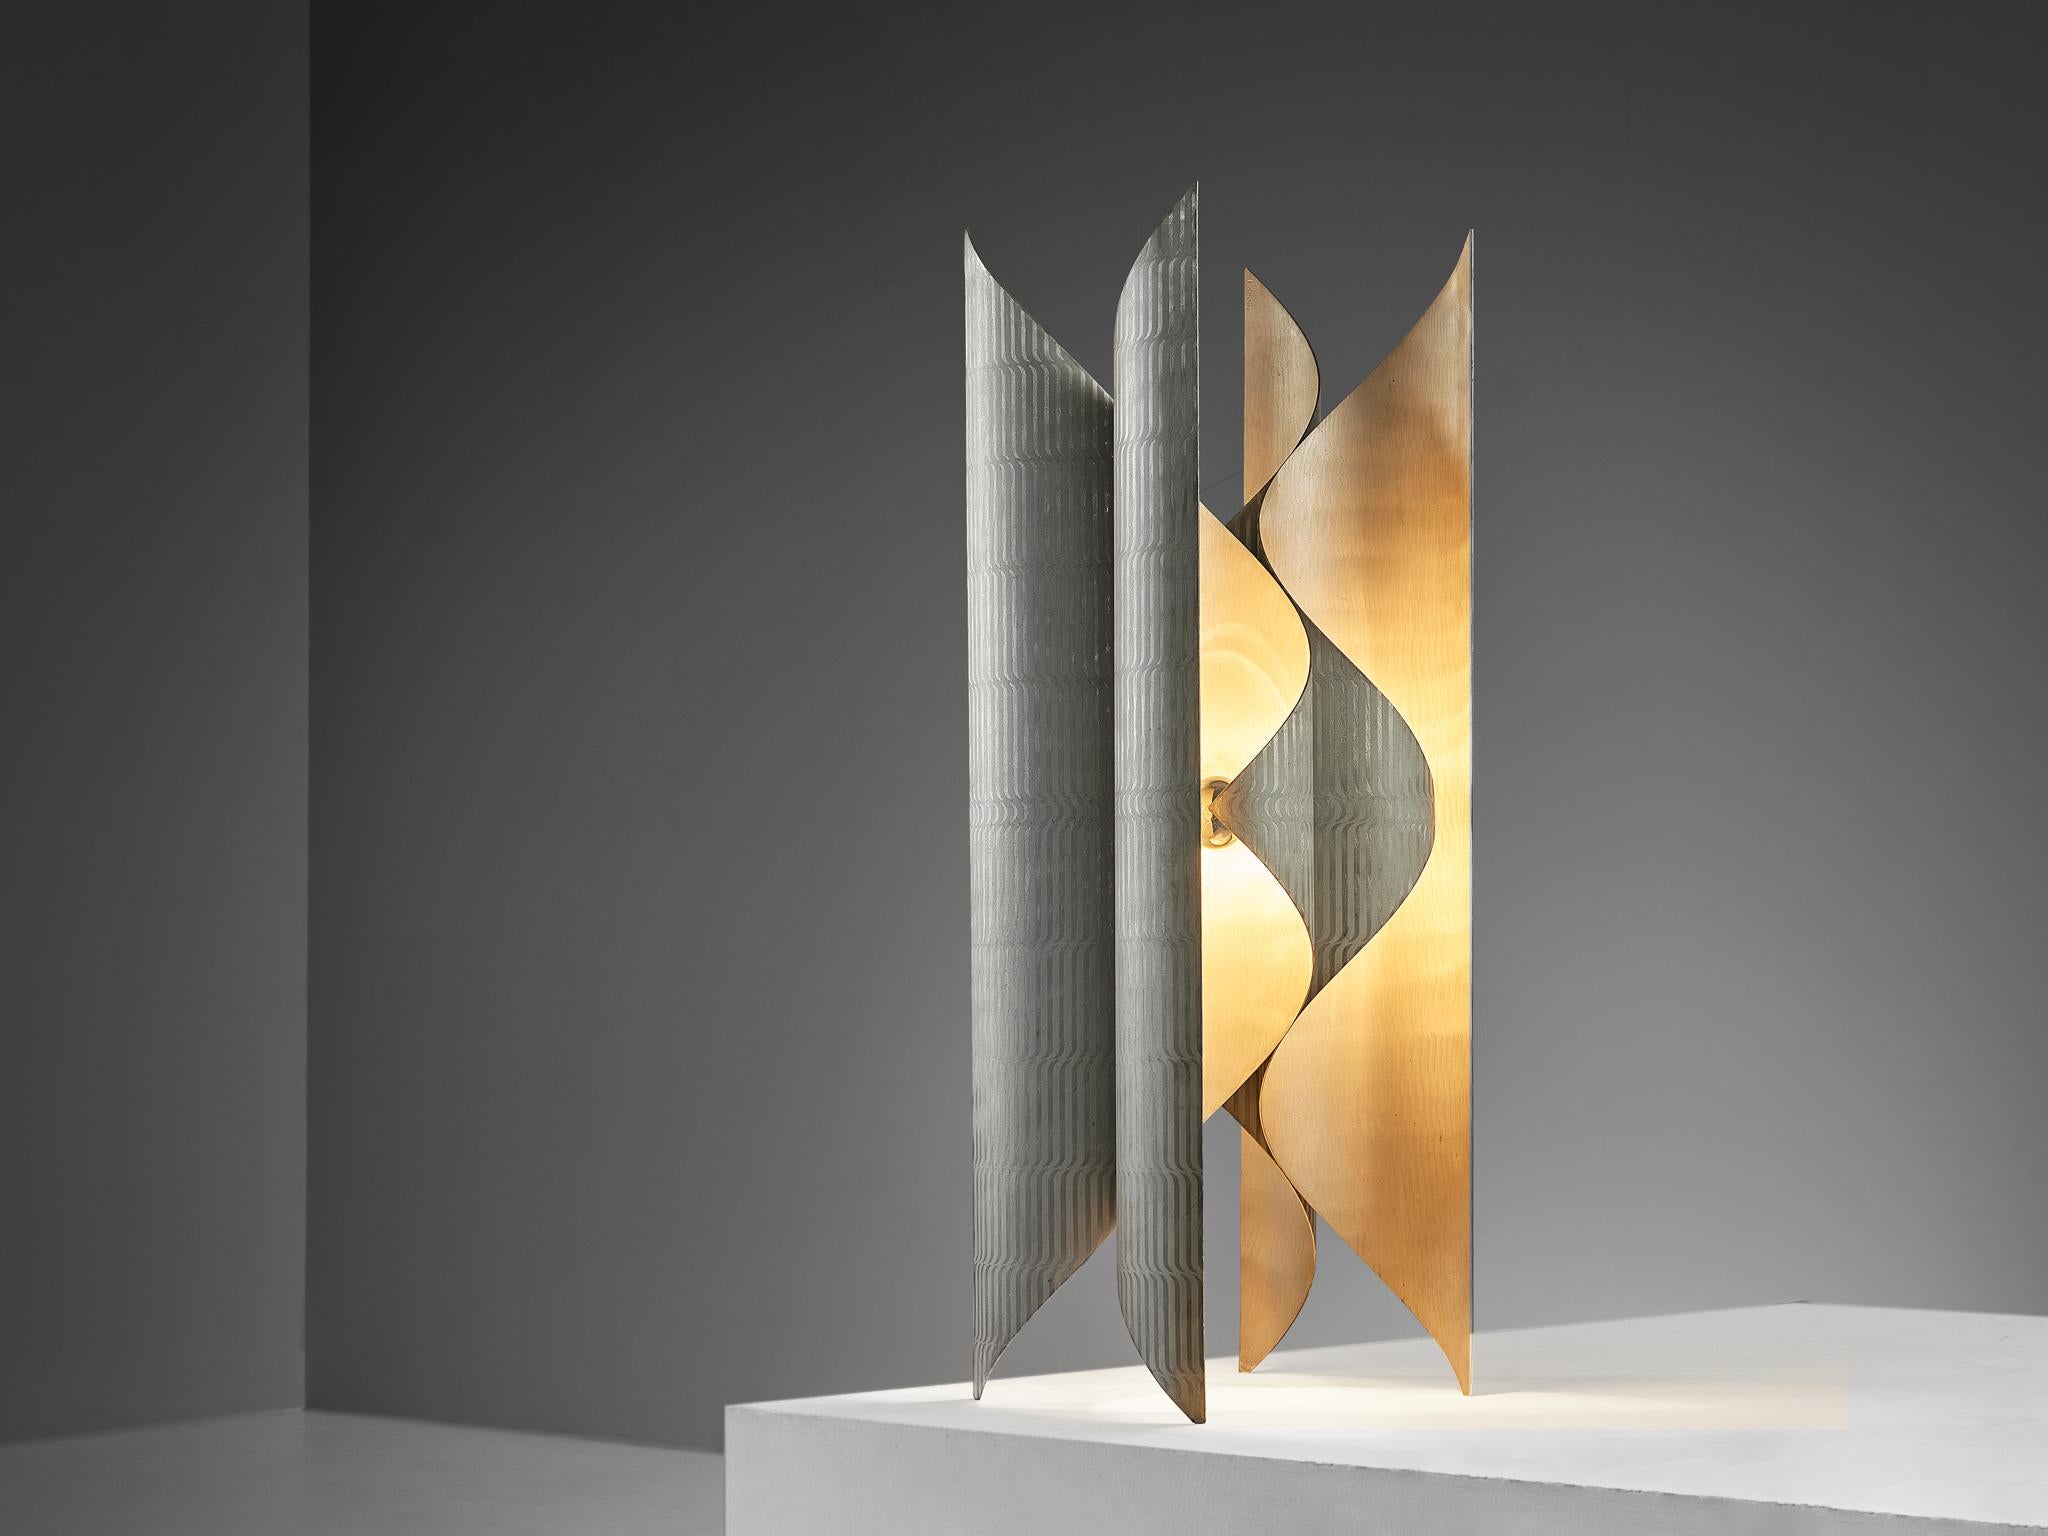 Lorenzo Burchiellaro, table or floor lamp, aluminium, Italy, 1970s

Sculptural and large lamp by Lorenzo Burchiellaro. Four triangular, bent aluminum sheets form a dynamic body to this lamp design. Each sheet is hiding one lightbulb, creating a soft